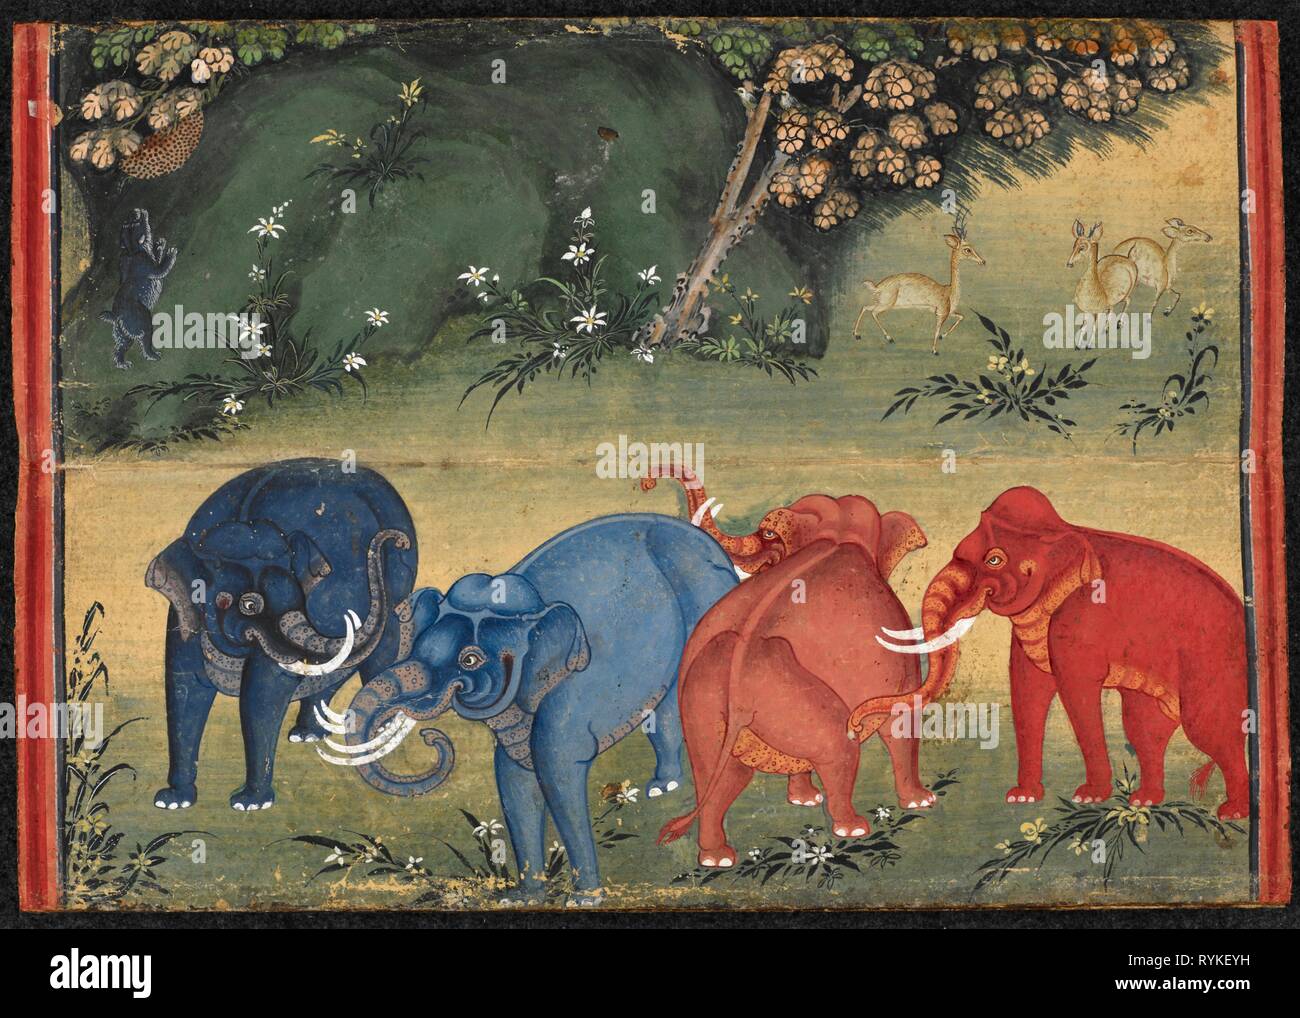 Elephants at play in the forest. Elephant treatise. c.1830. Painting on folded paper, script in ink with text and illustrations of elephant divinities and natural elephants. Source: Or. 13652, f.20. Language: Thai. Stock Photo